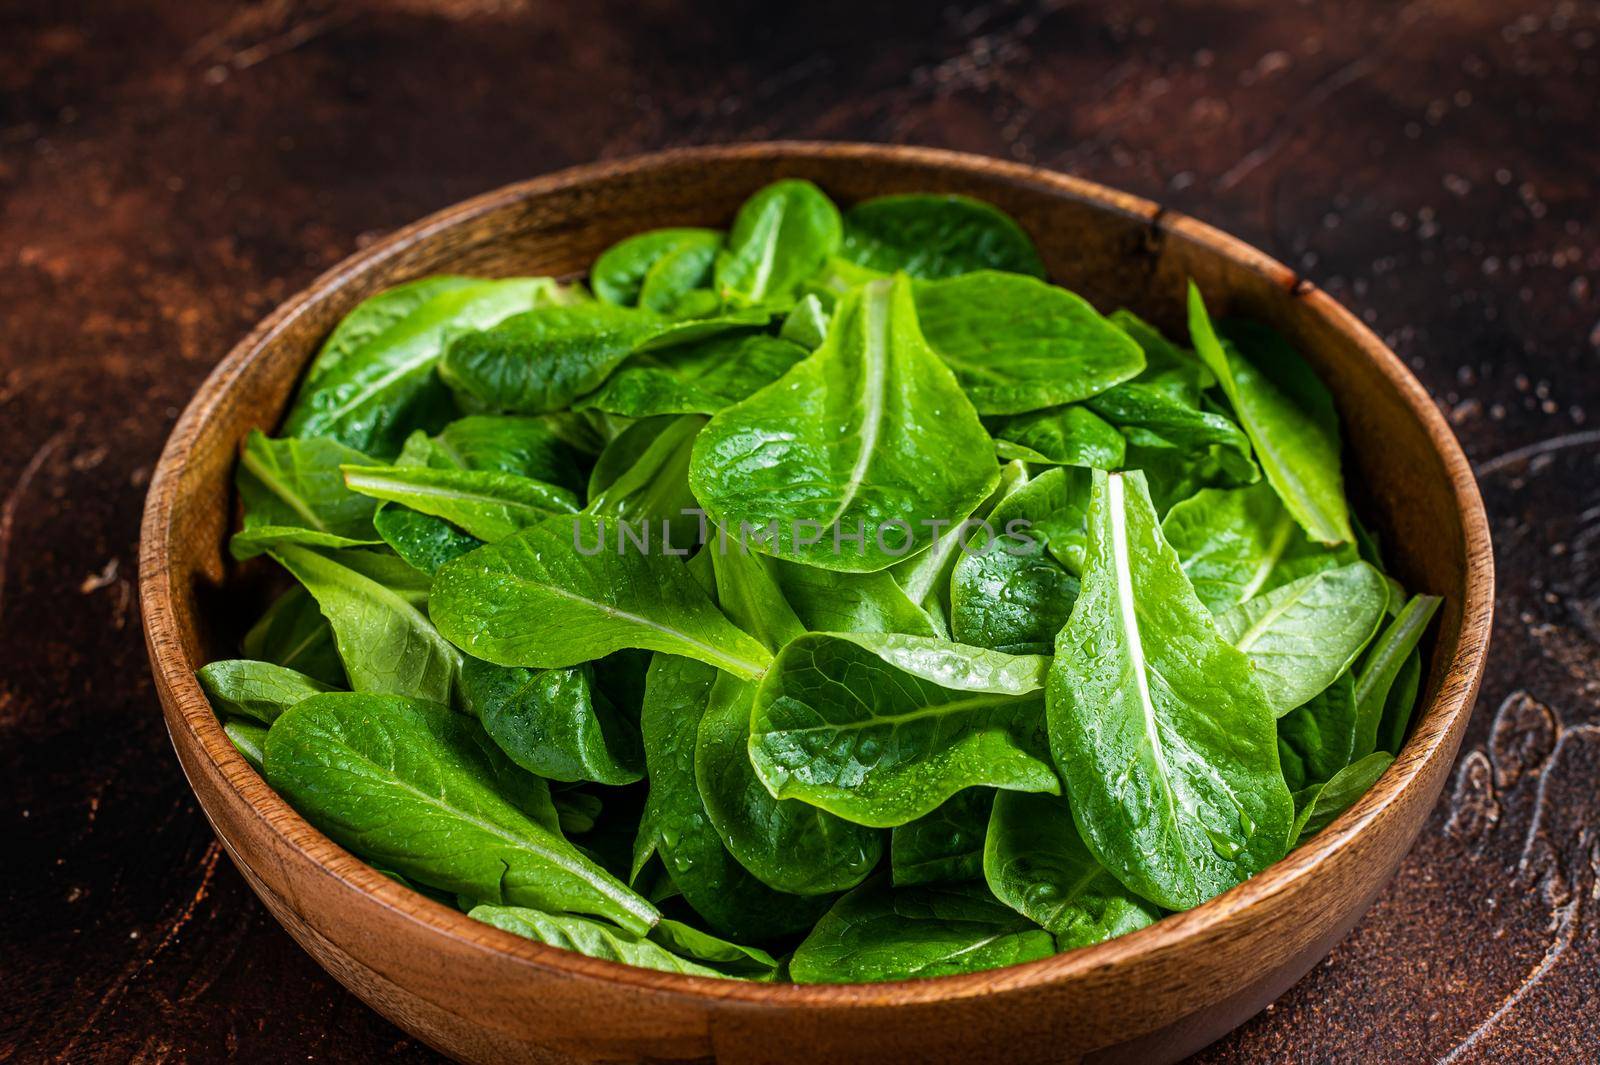 Young romain green salad leaves in wooden plate. Dark background. Top view by Composter